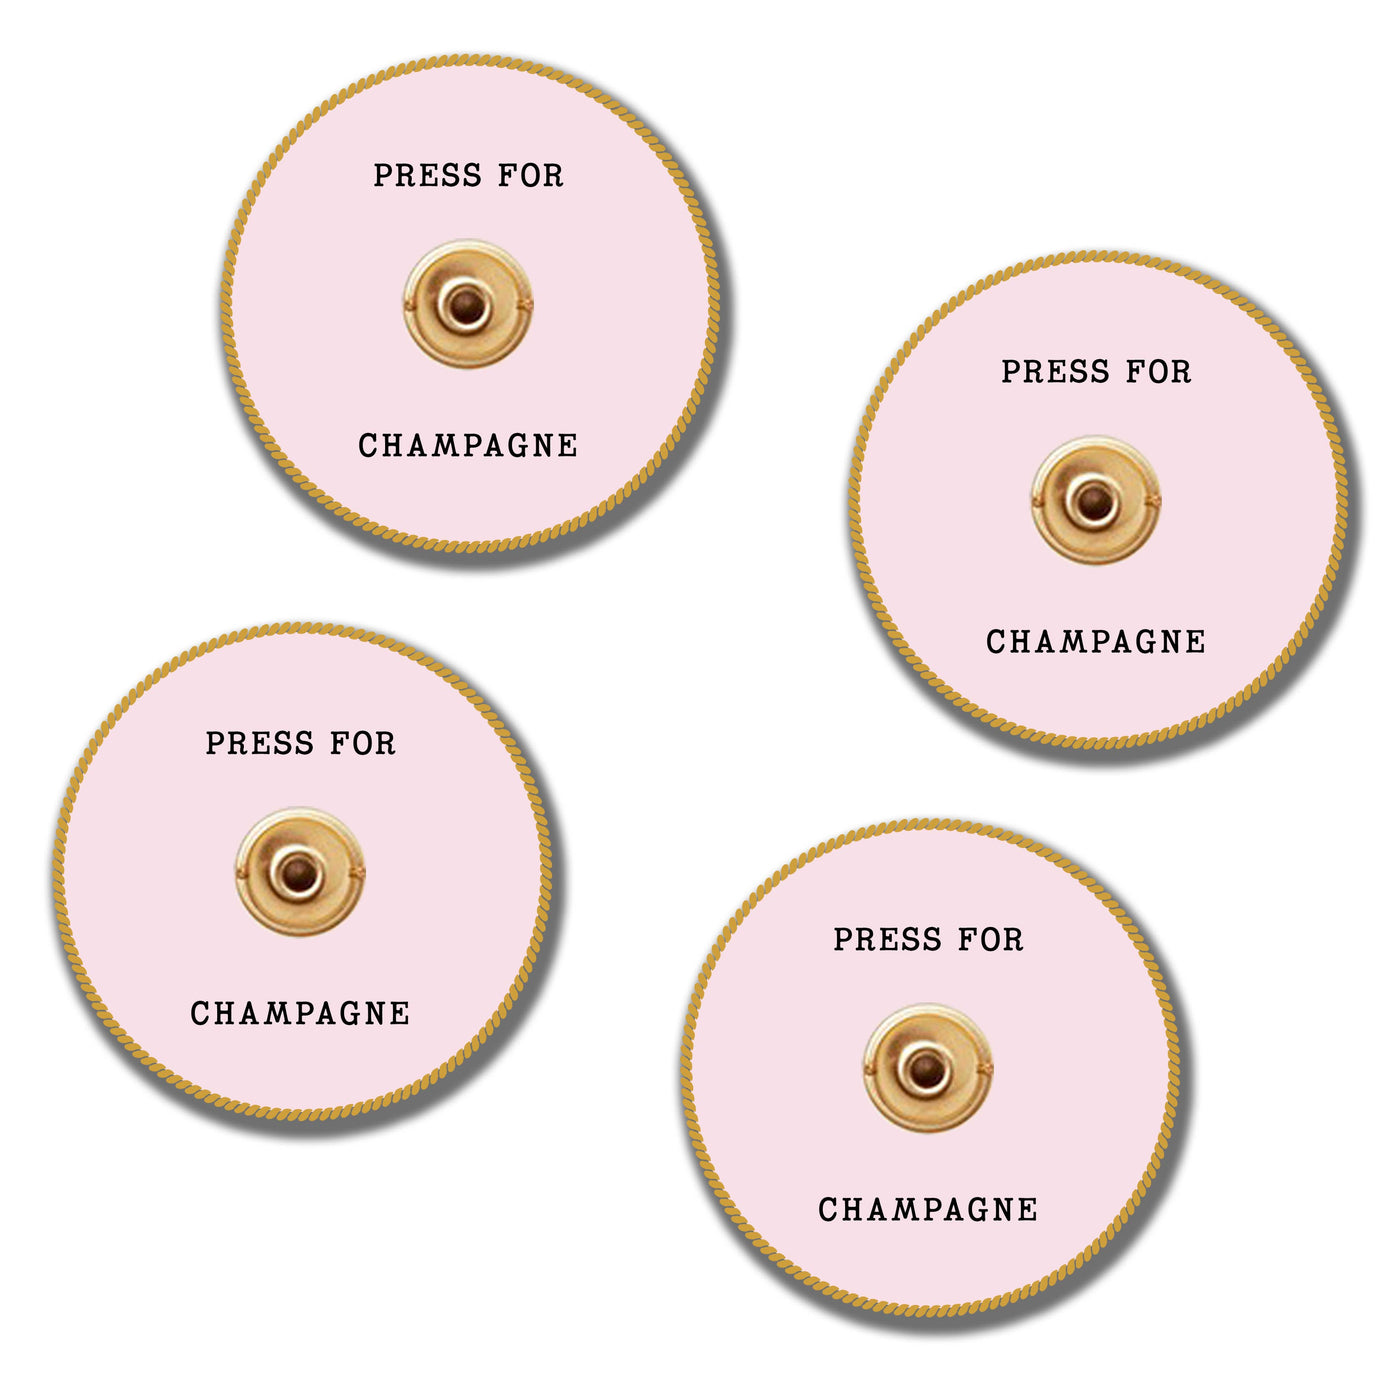 Press for Champagne-Set of 4 Ceramic Coasters